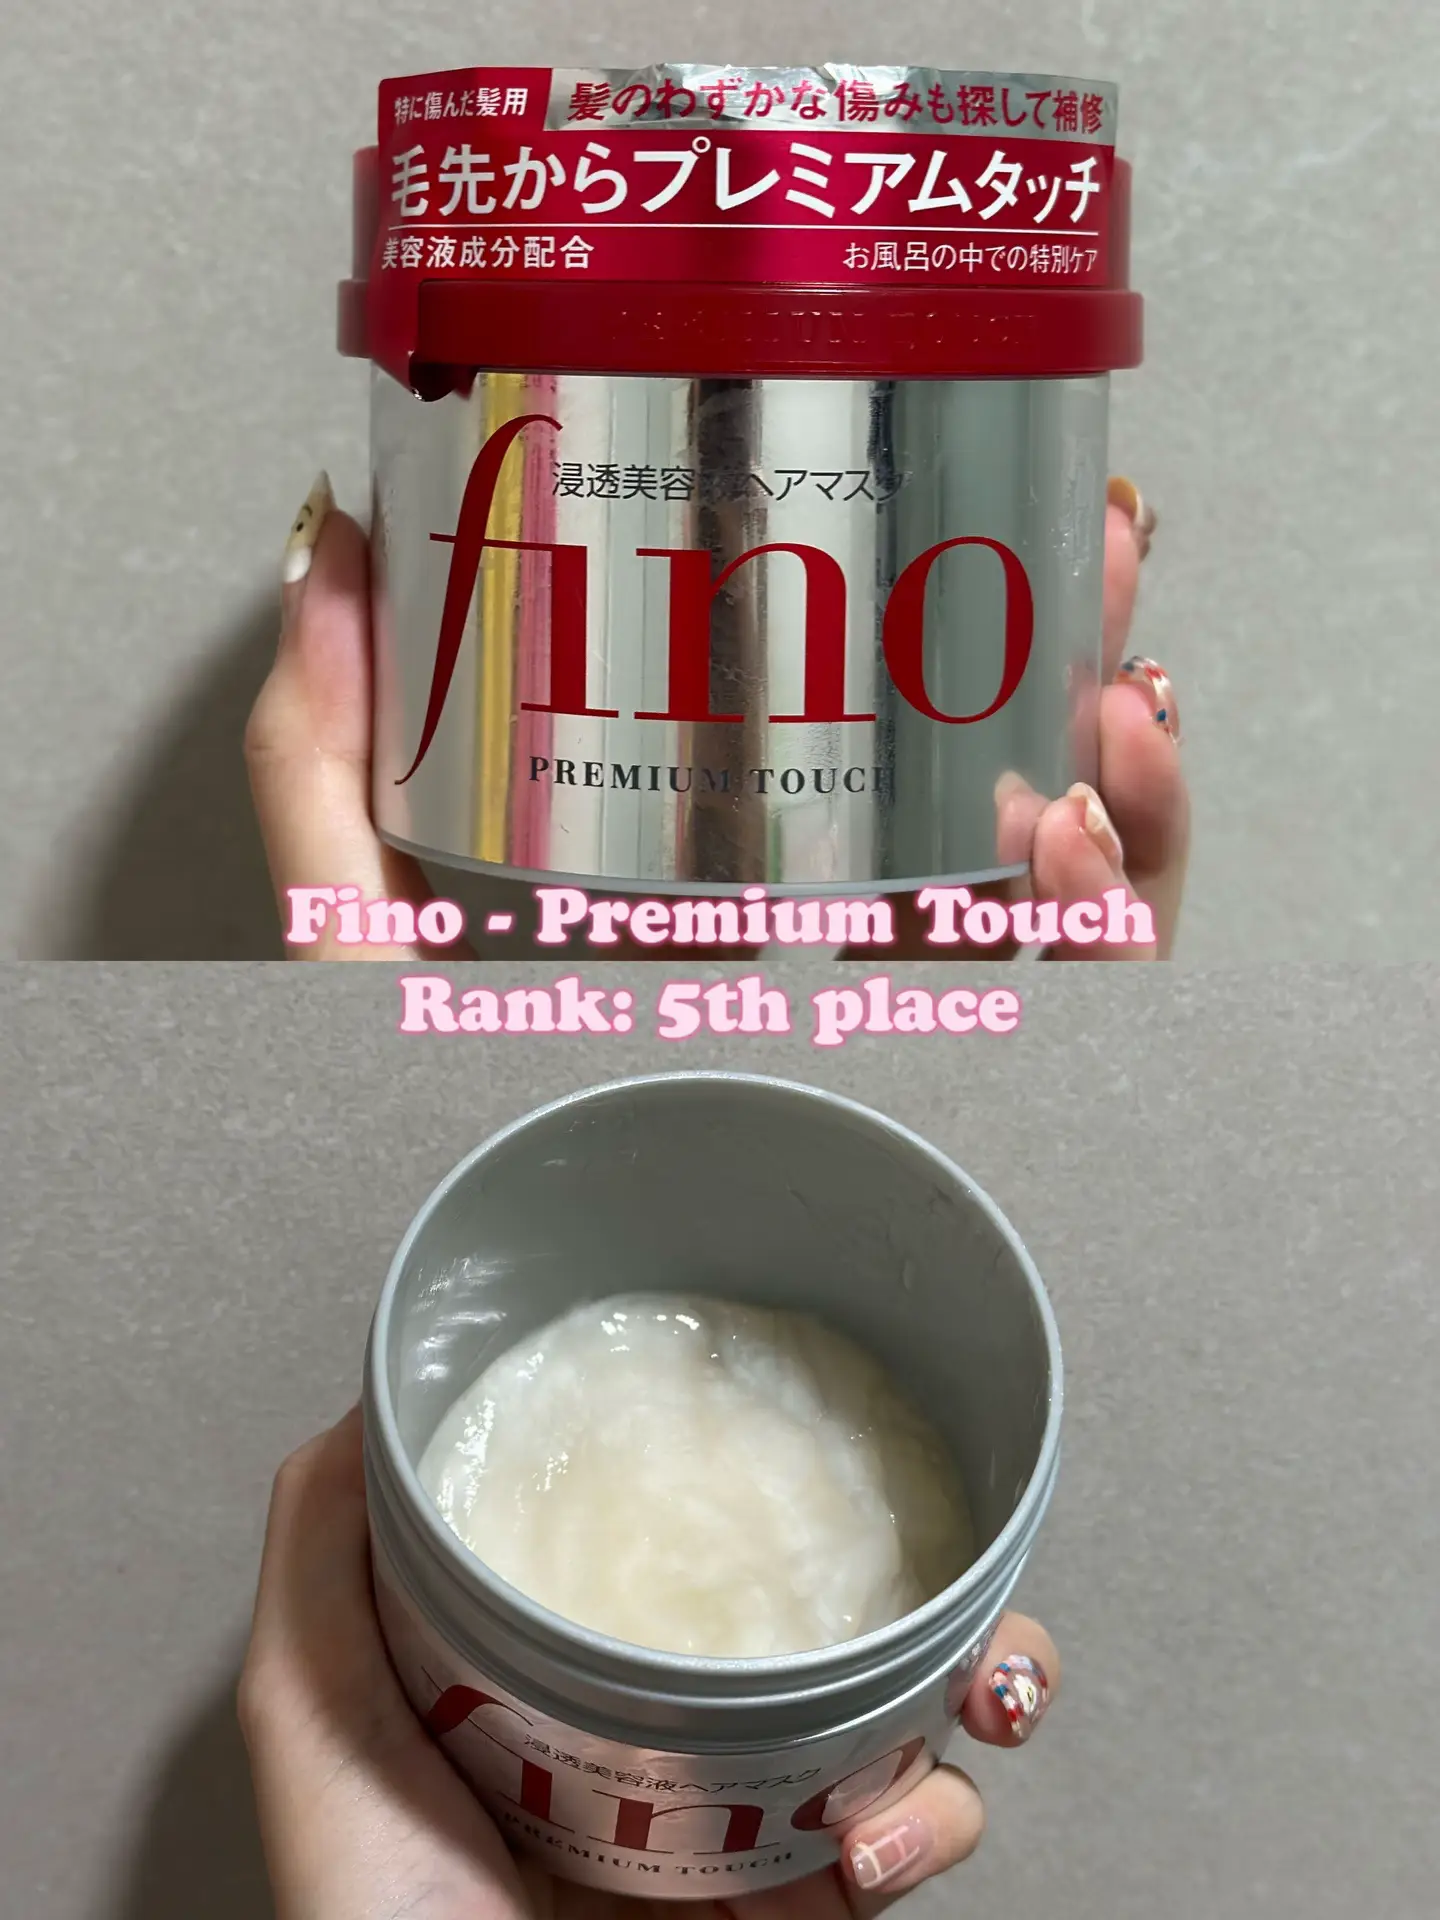 i finally tried out the viral FINO hair mask ✨🫧, Gallery posted by rach  👽